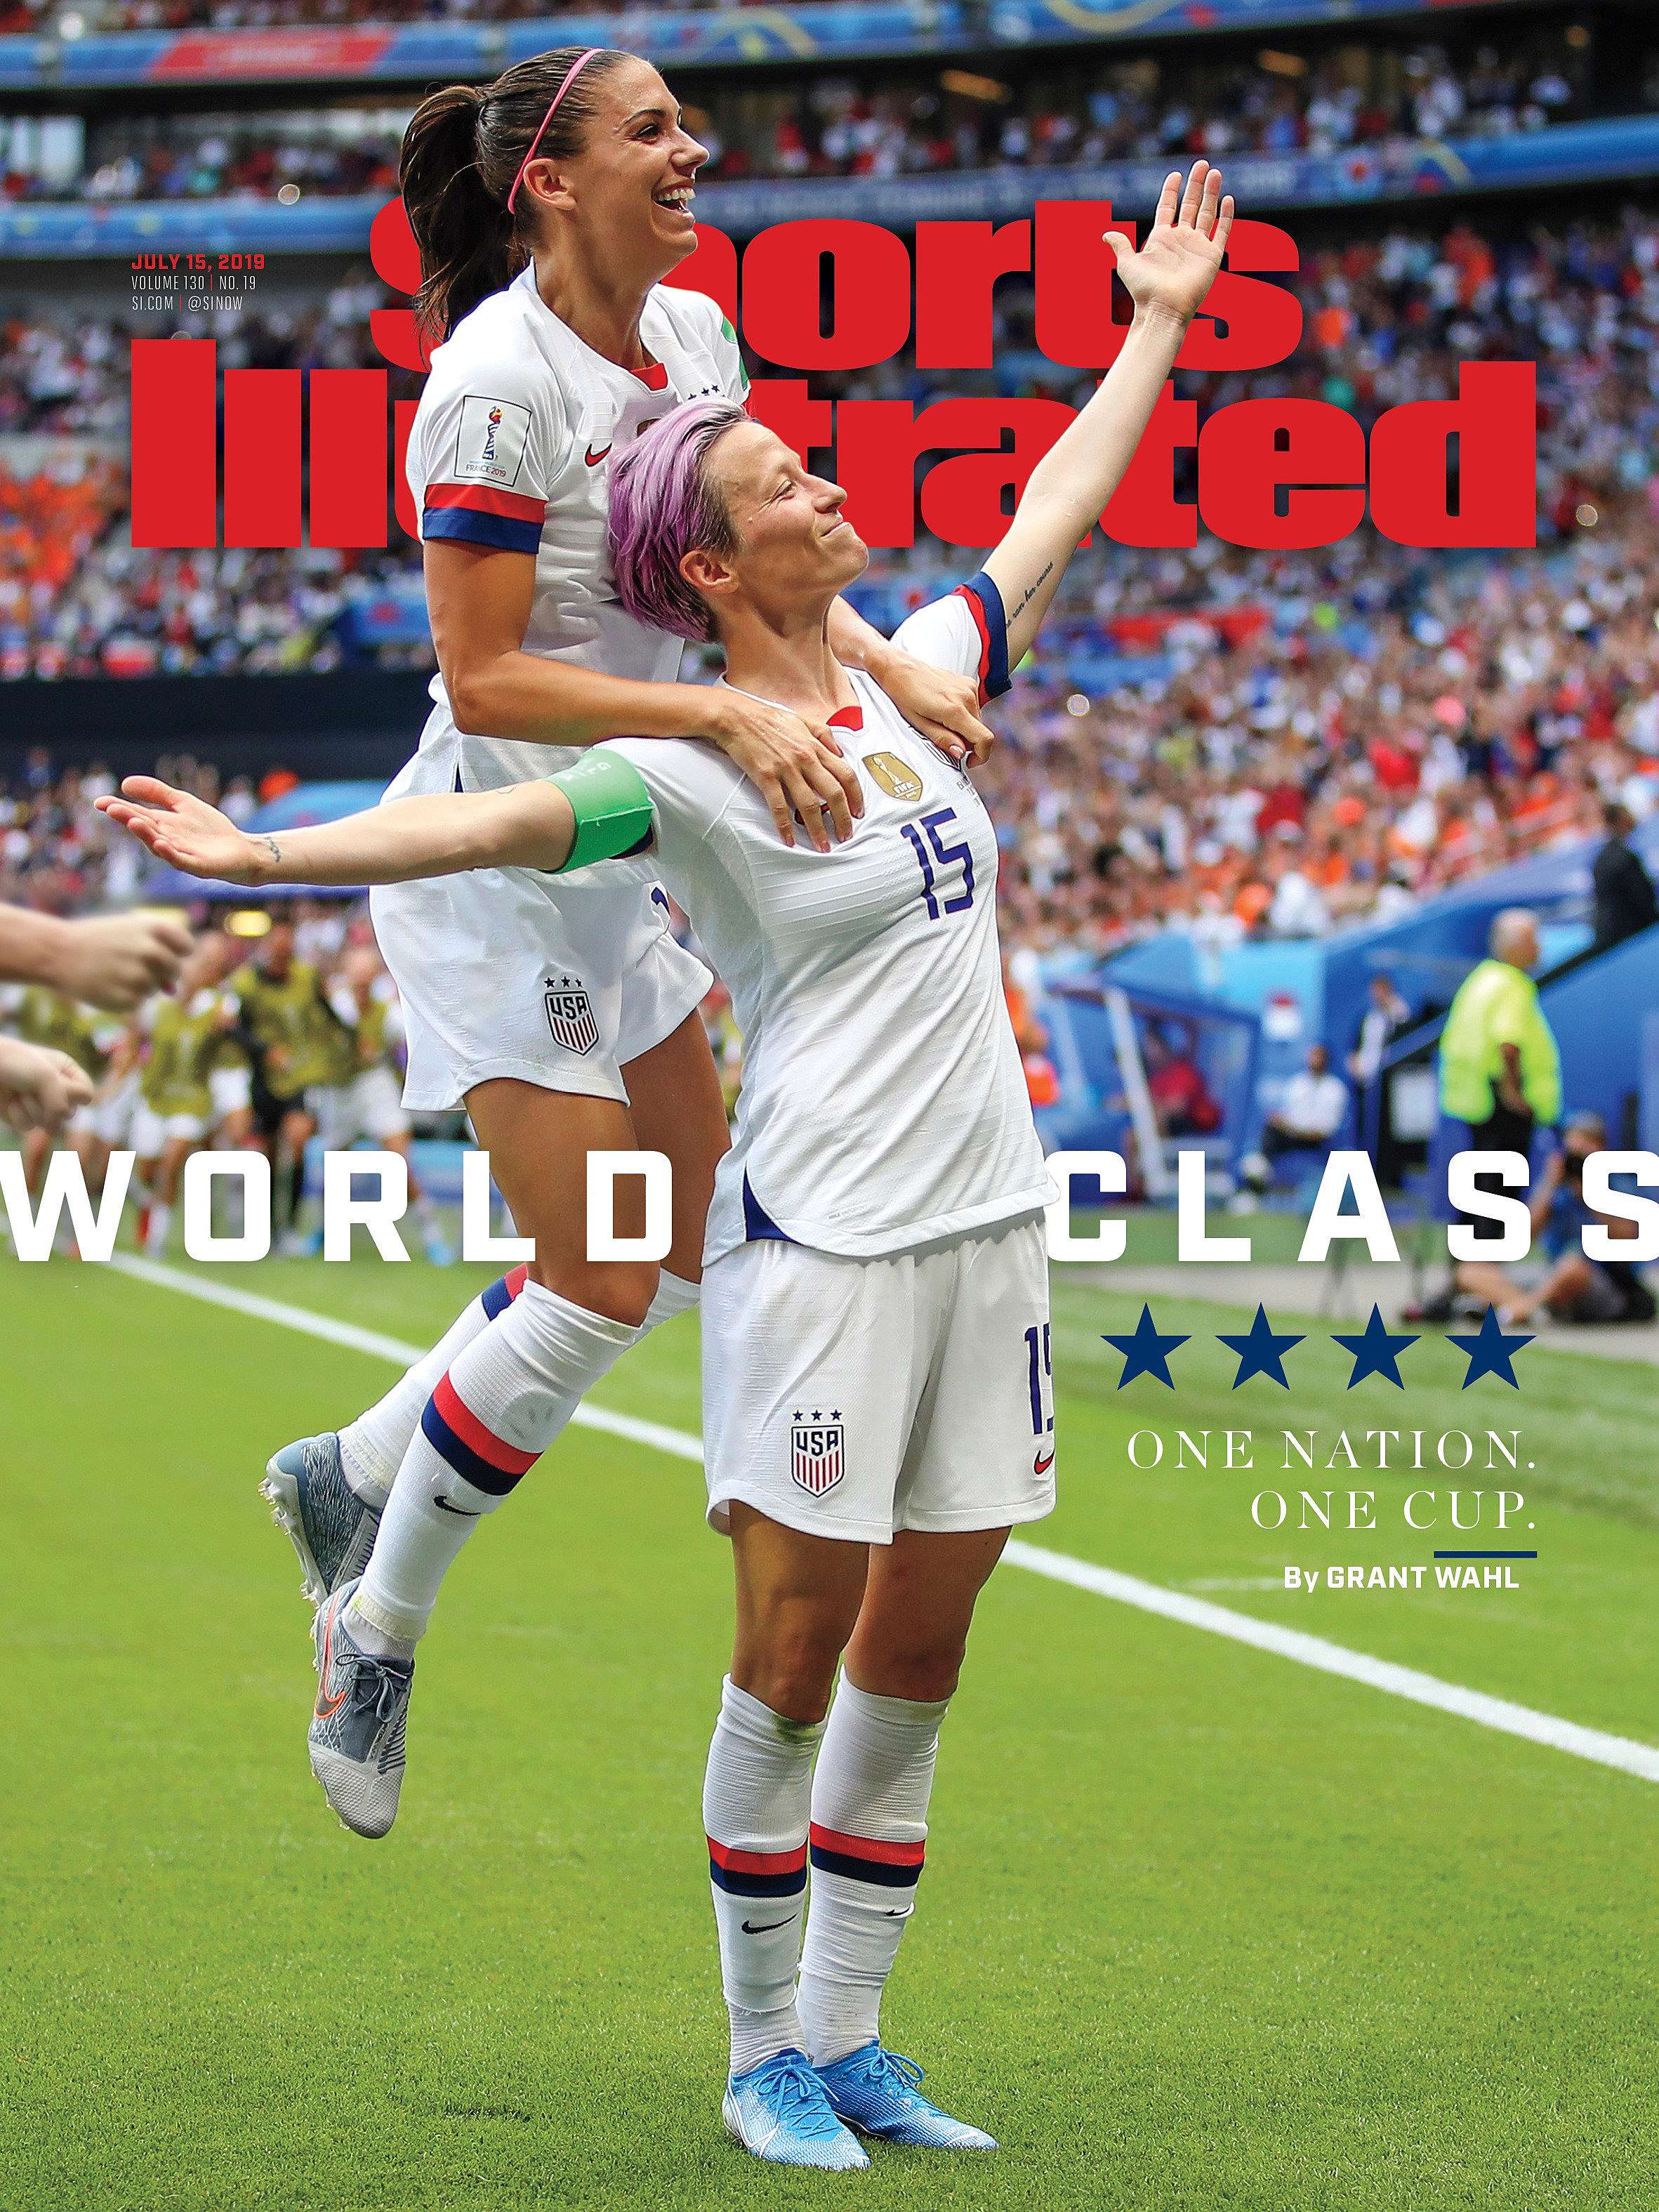 Alex Morgan and Megan Rapinoe land the cover of Sports